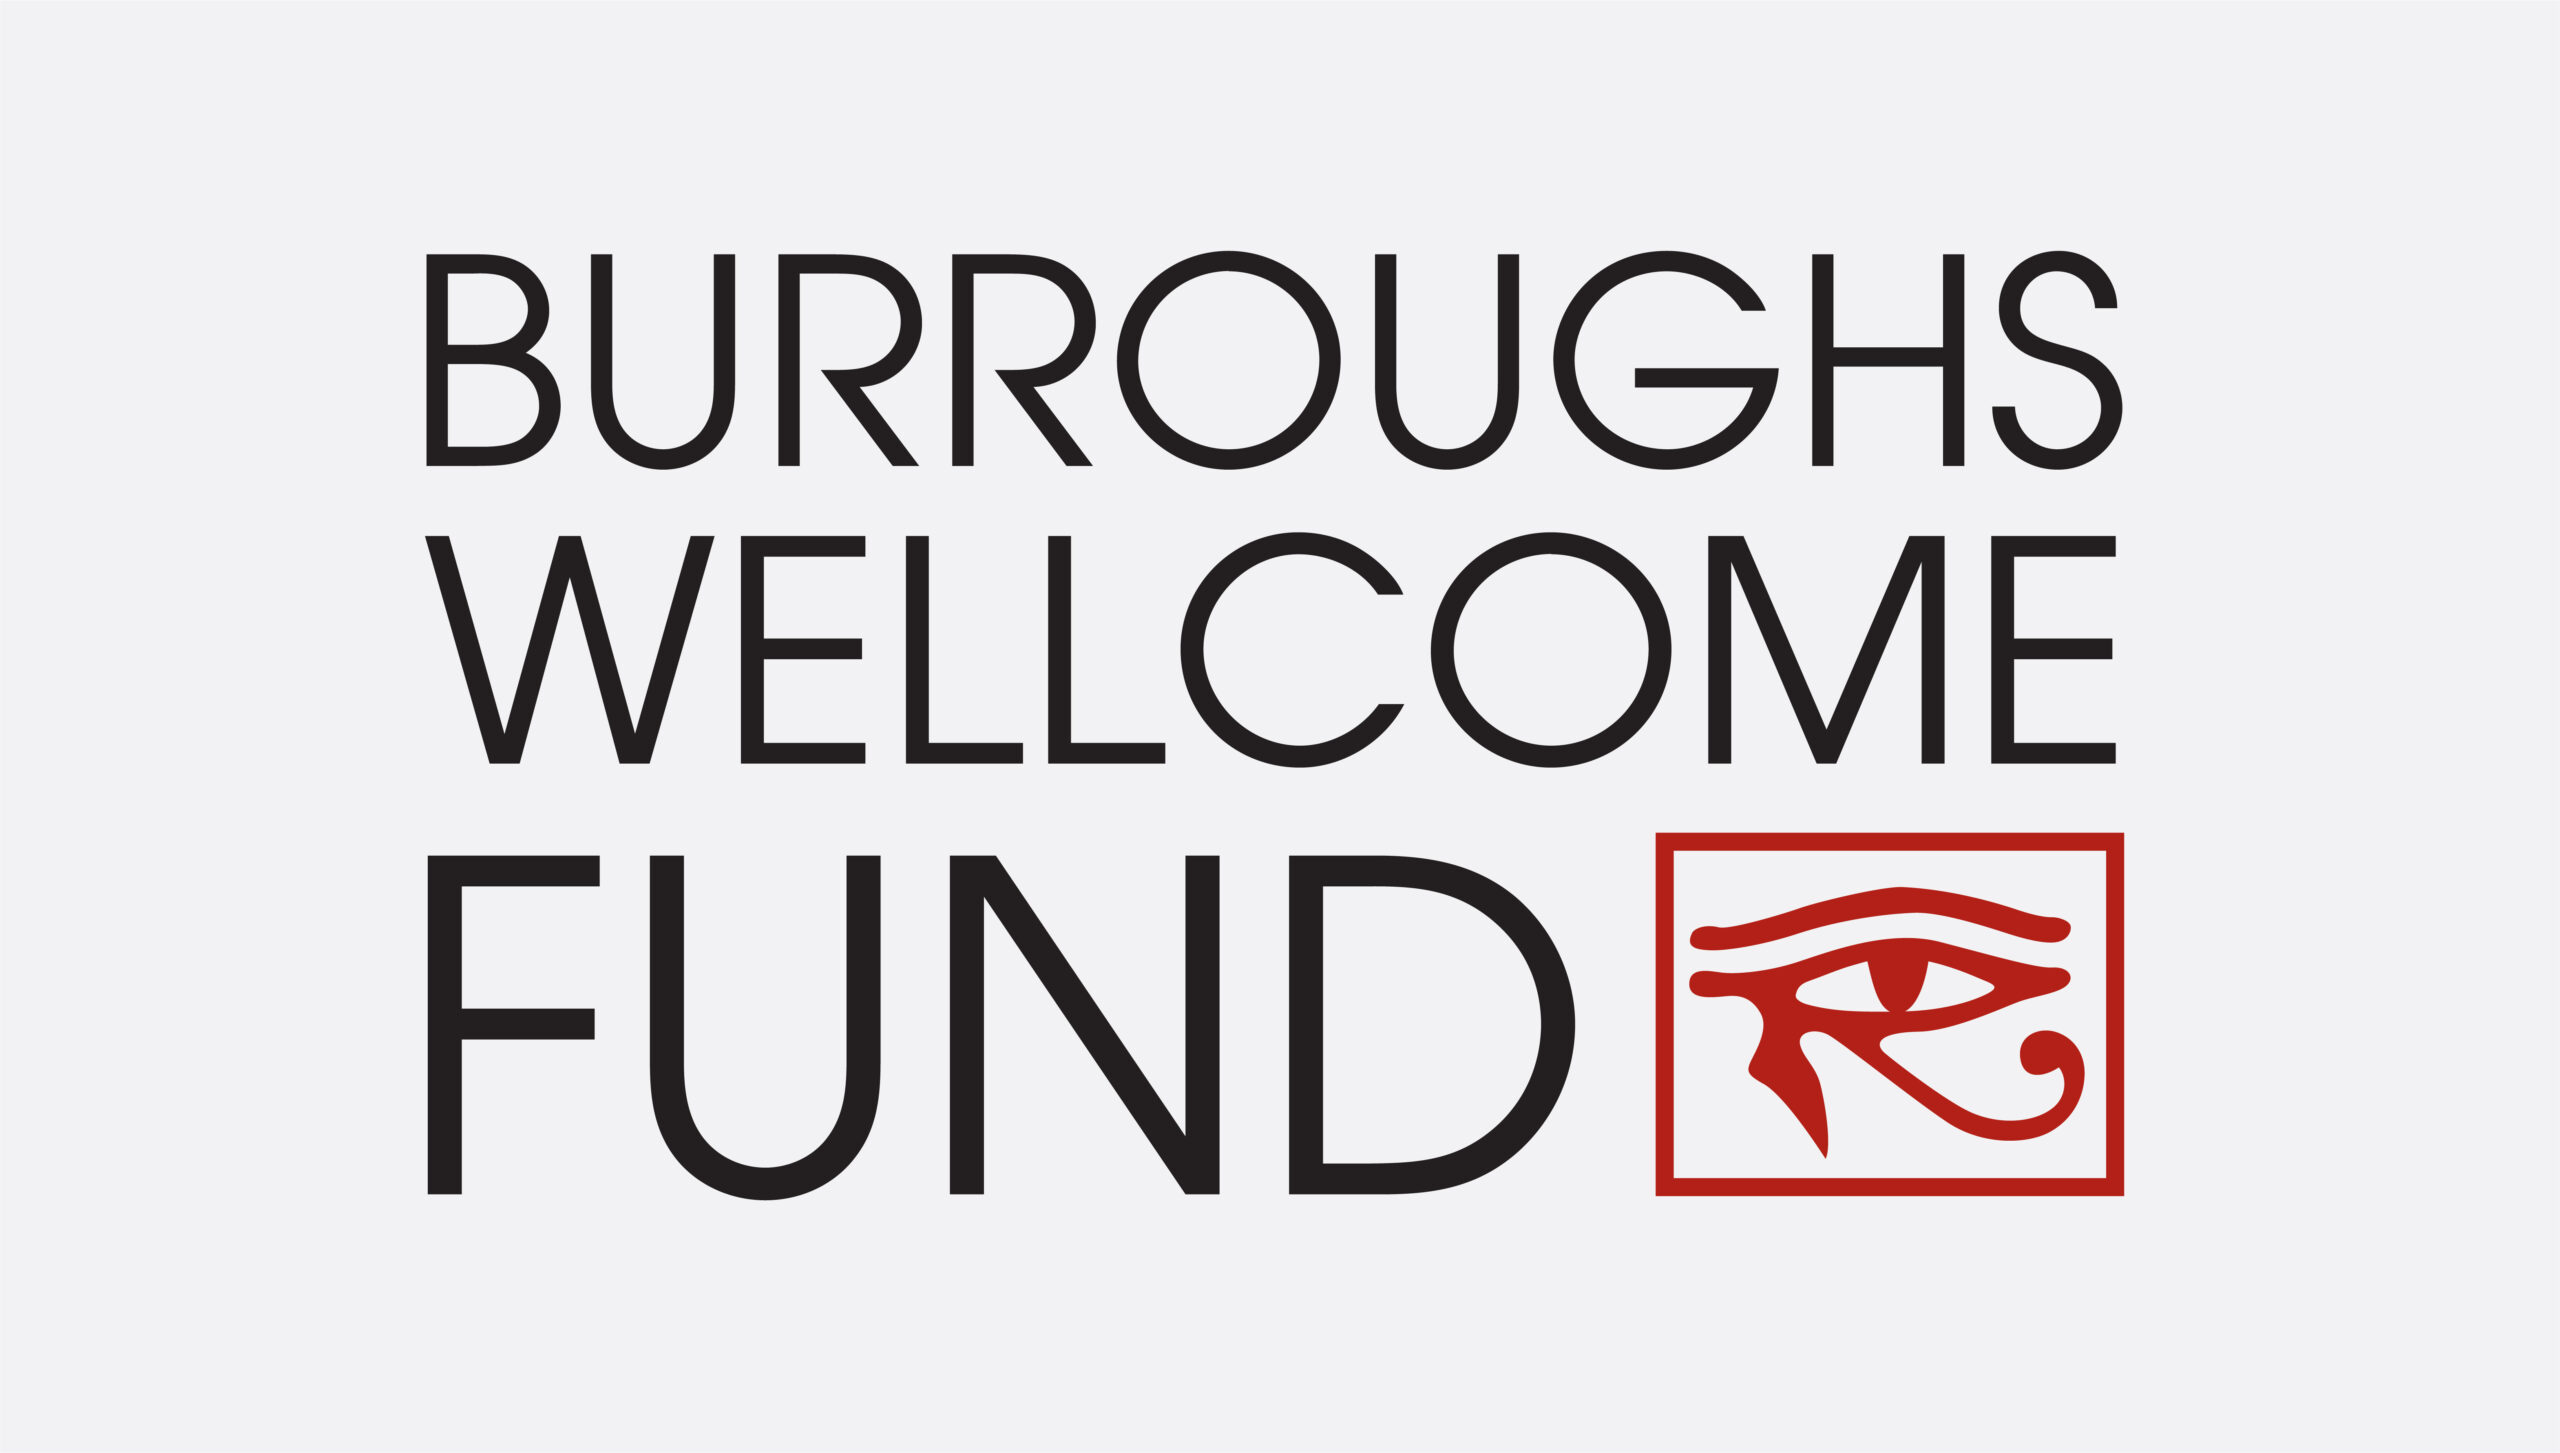 Burroughs Wellcome Fund wordmark on light gray background